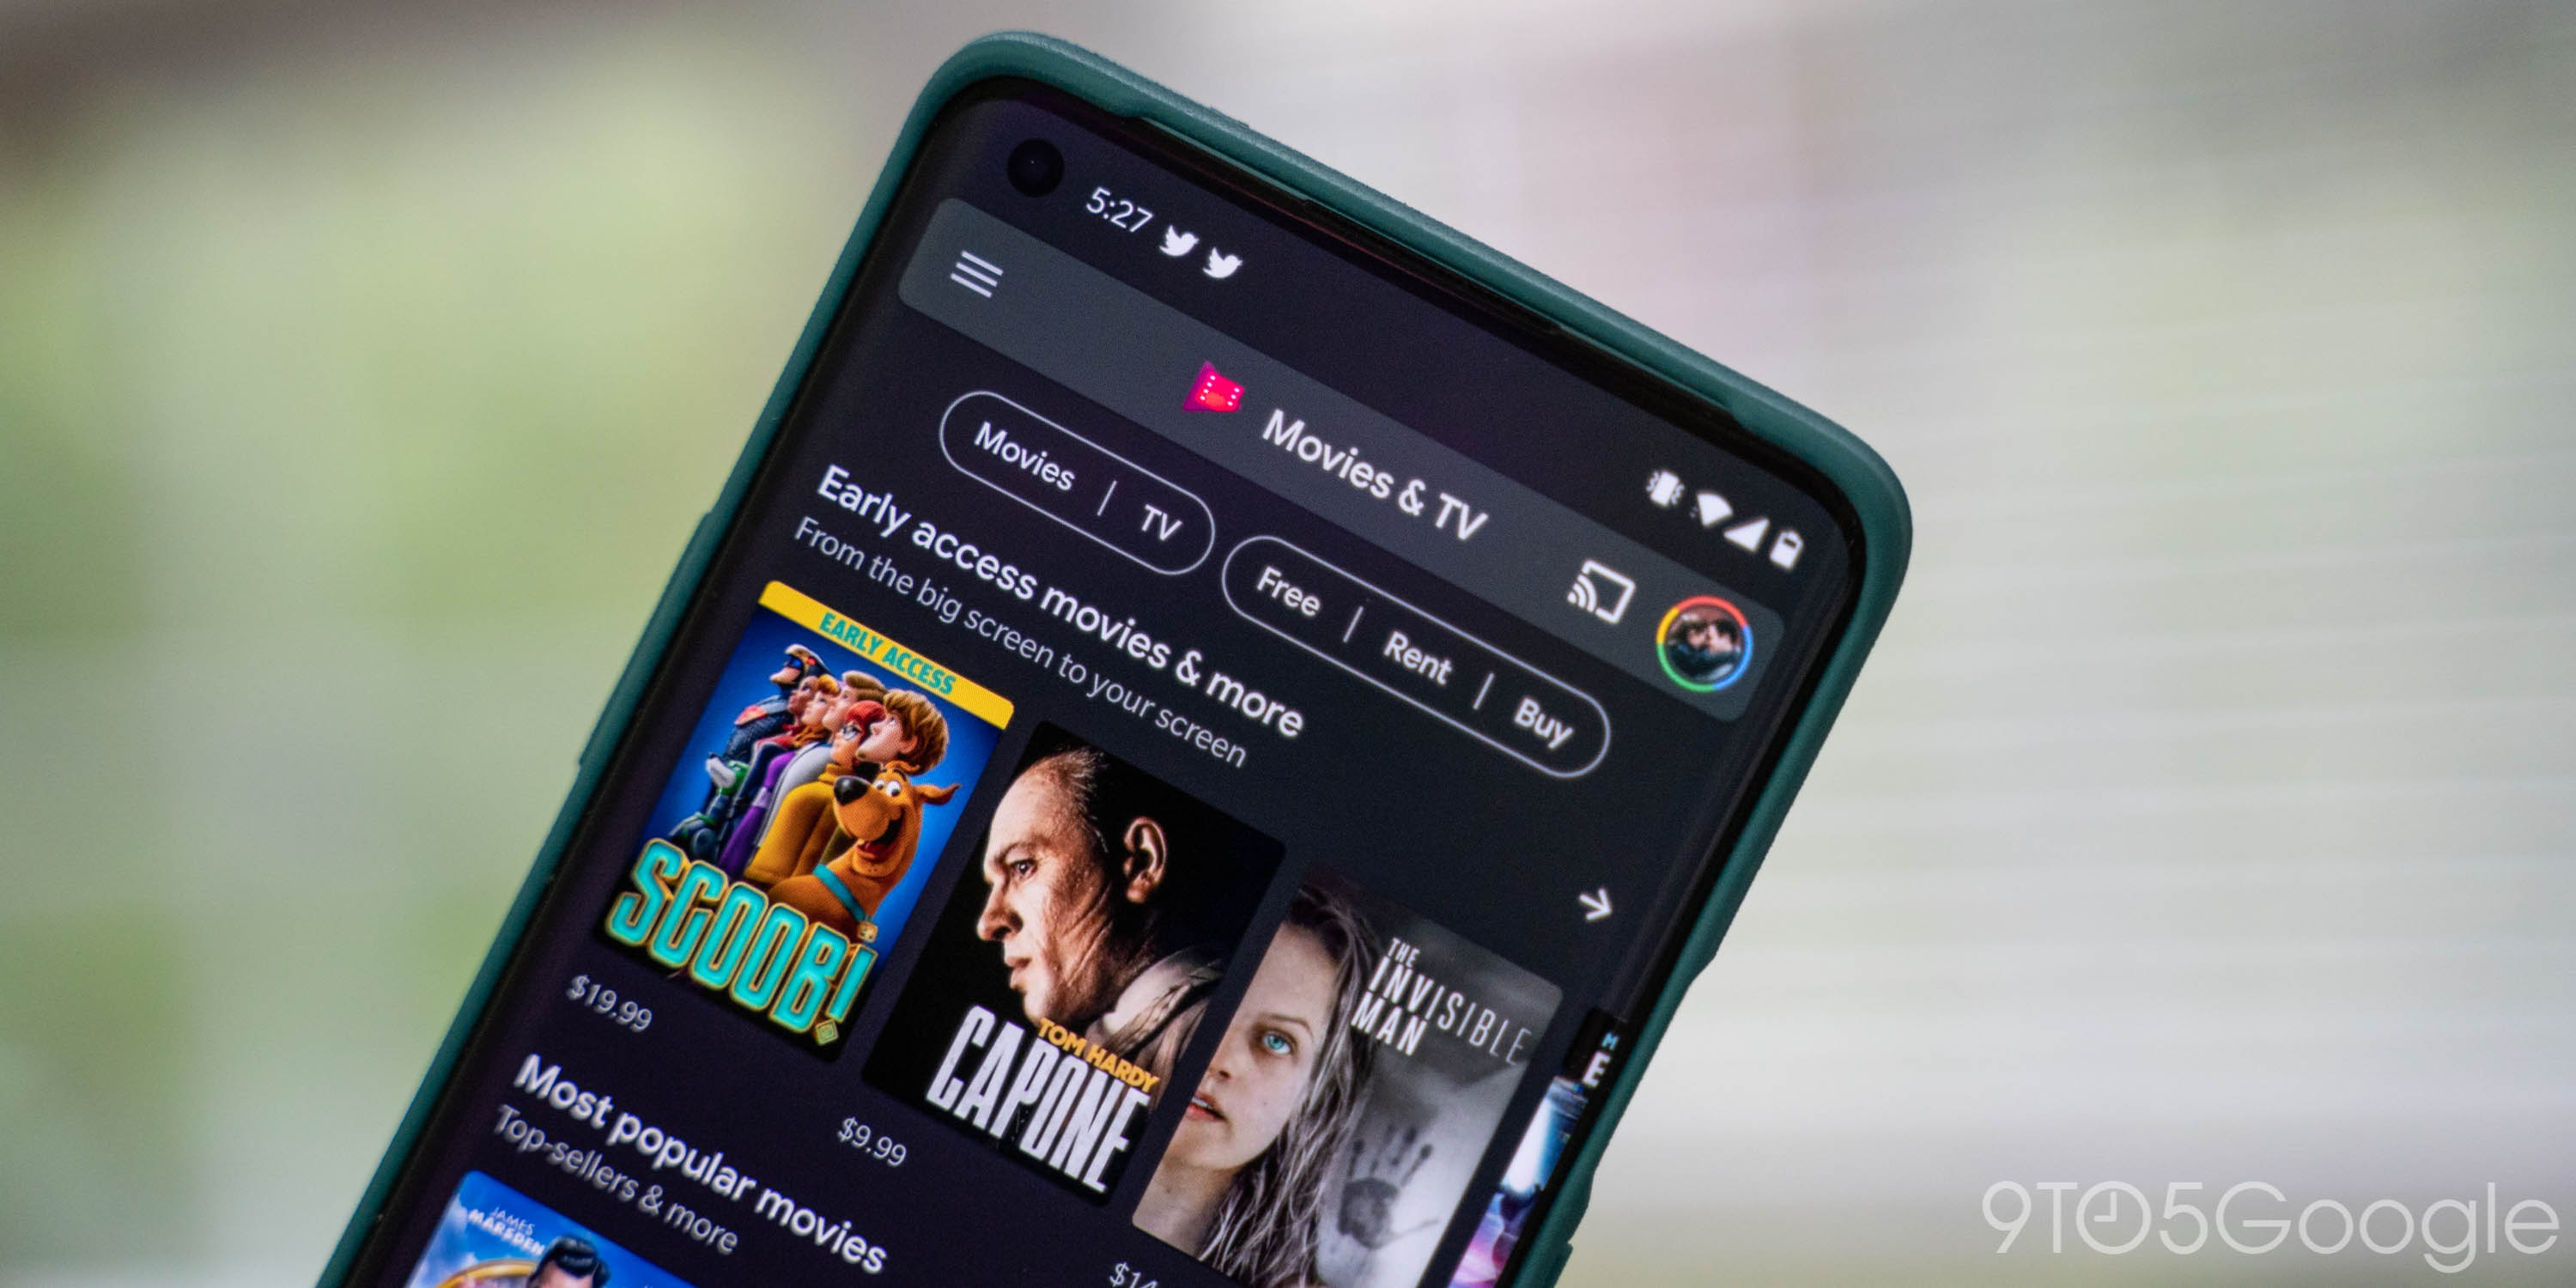 Google Play Movies reaches 5 billion installs on Play Store 9to5Google